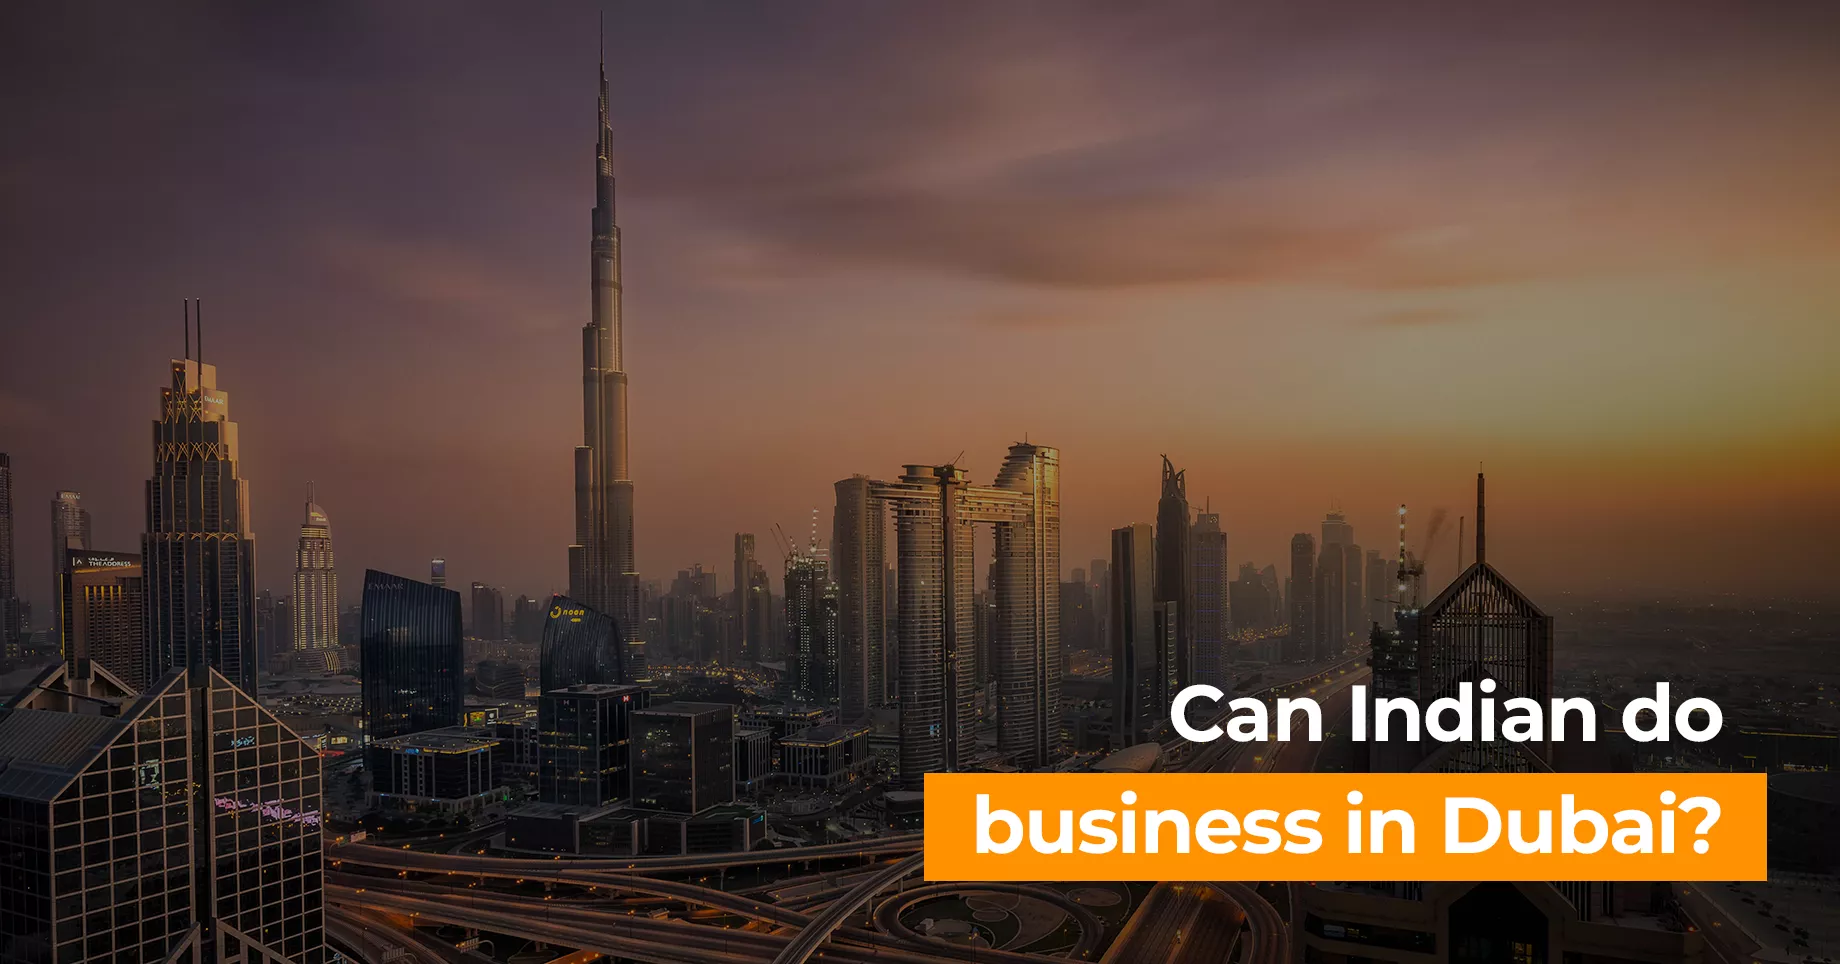 Can Indian do business in Dubai?